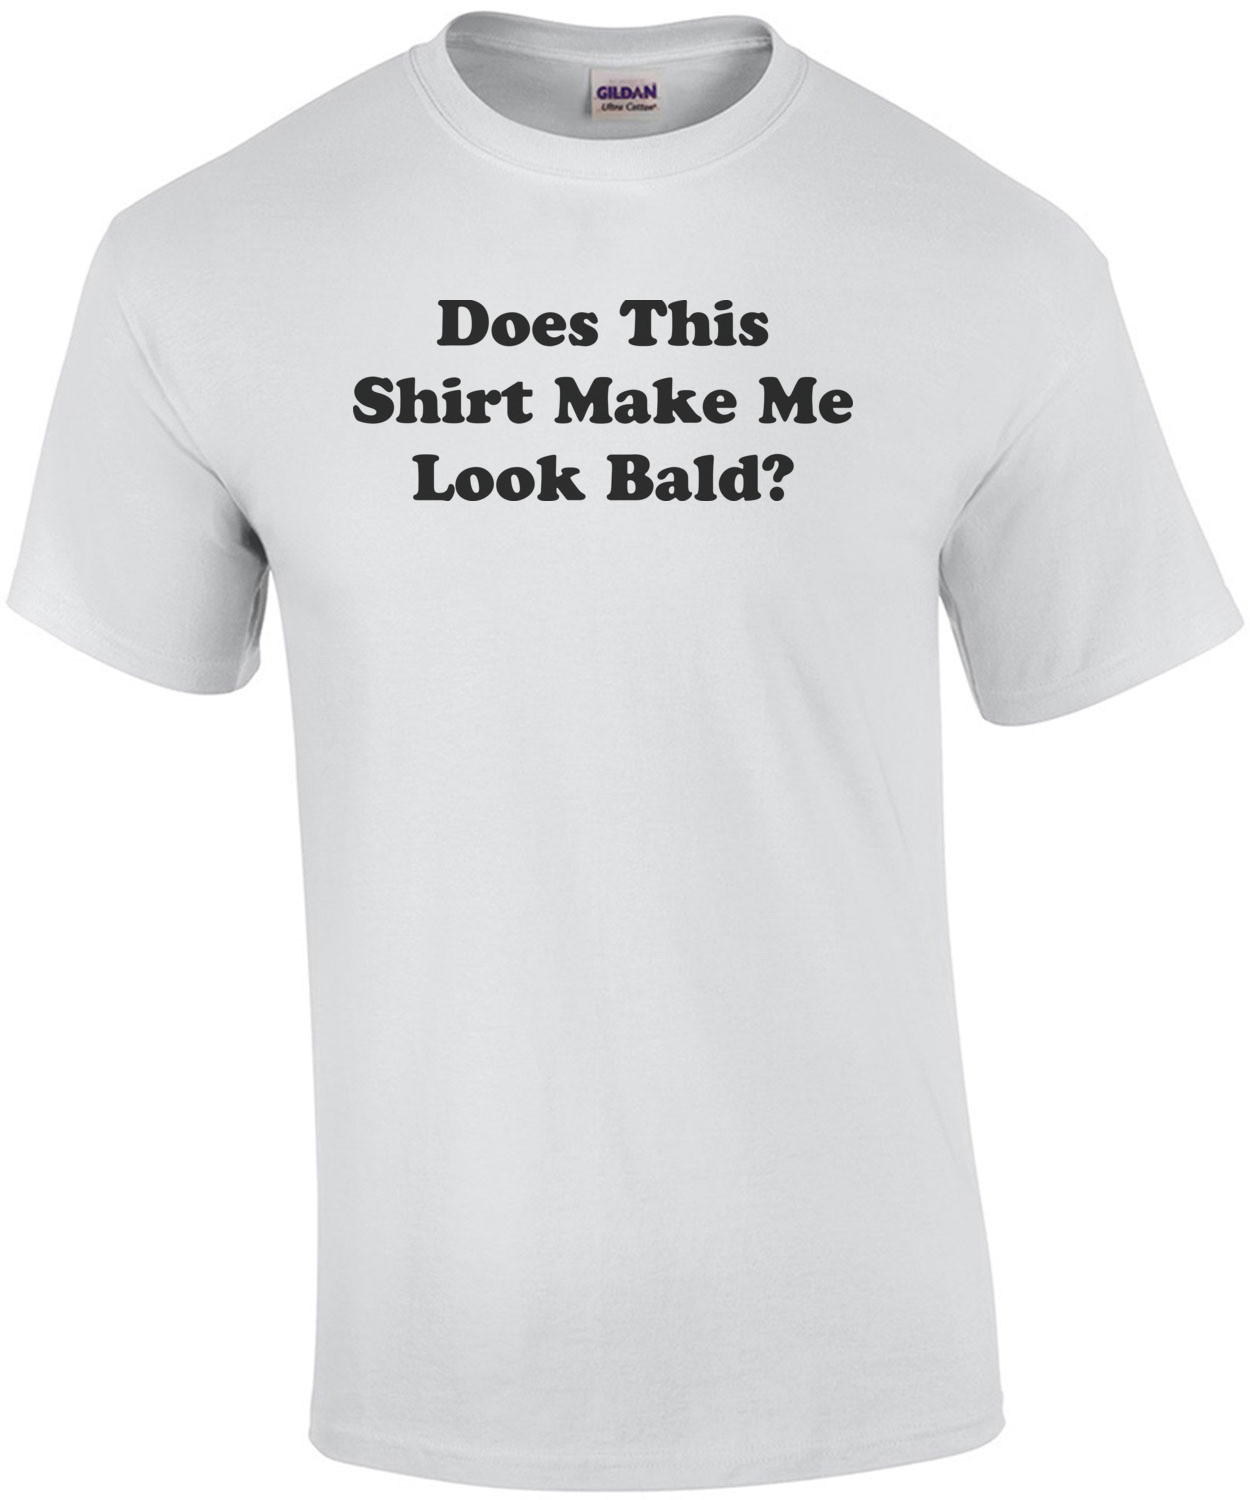 Does This Shirt Make Me Look Bald?